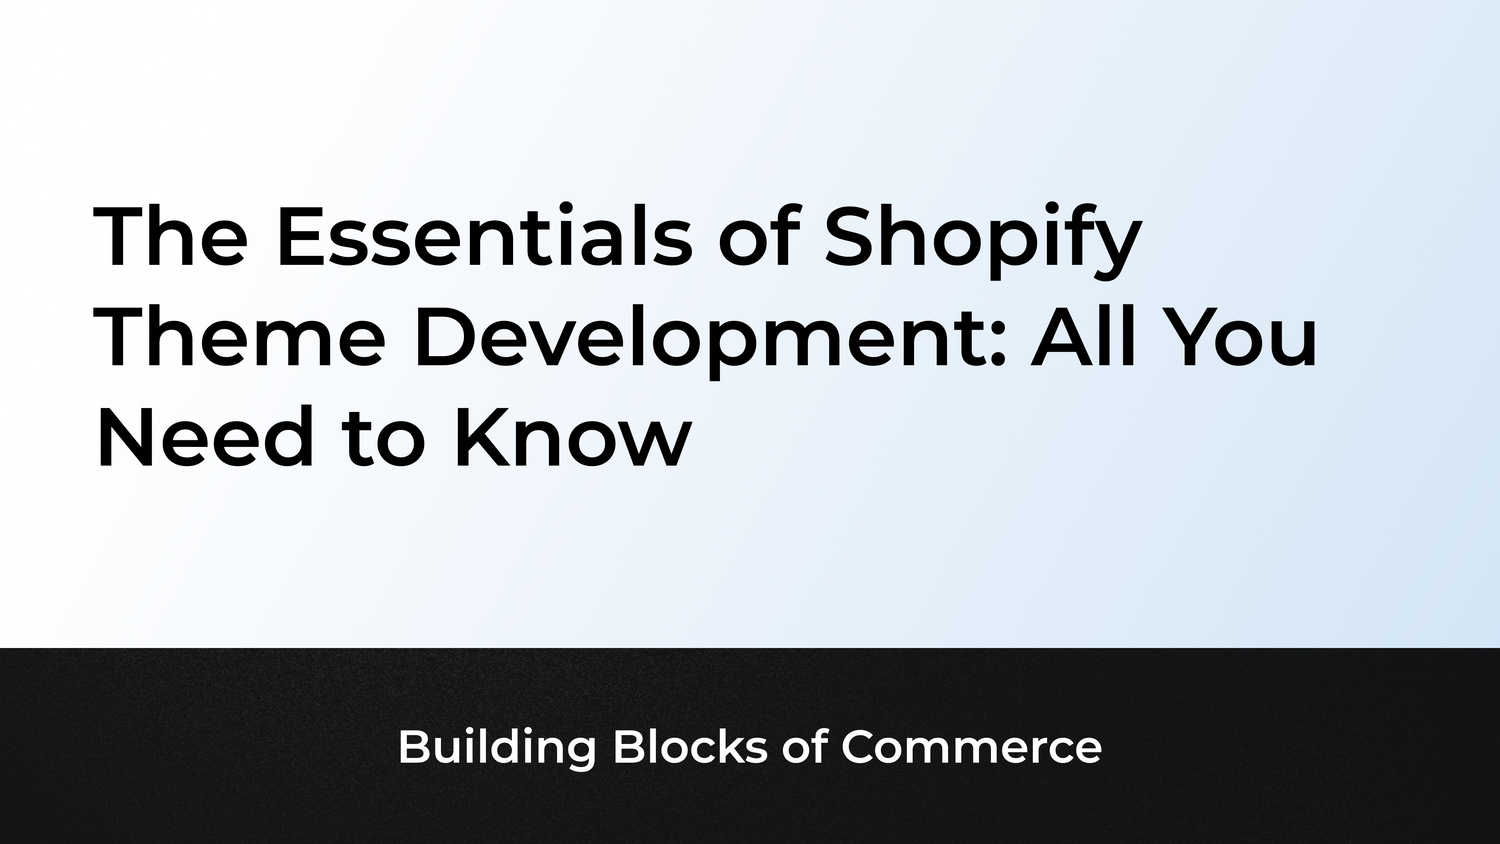 The Essentials of Shopify Theme Development: All You Need to Know